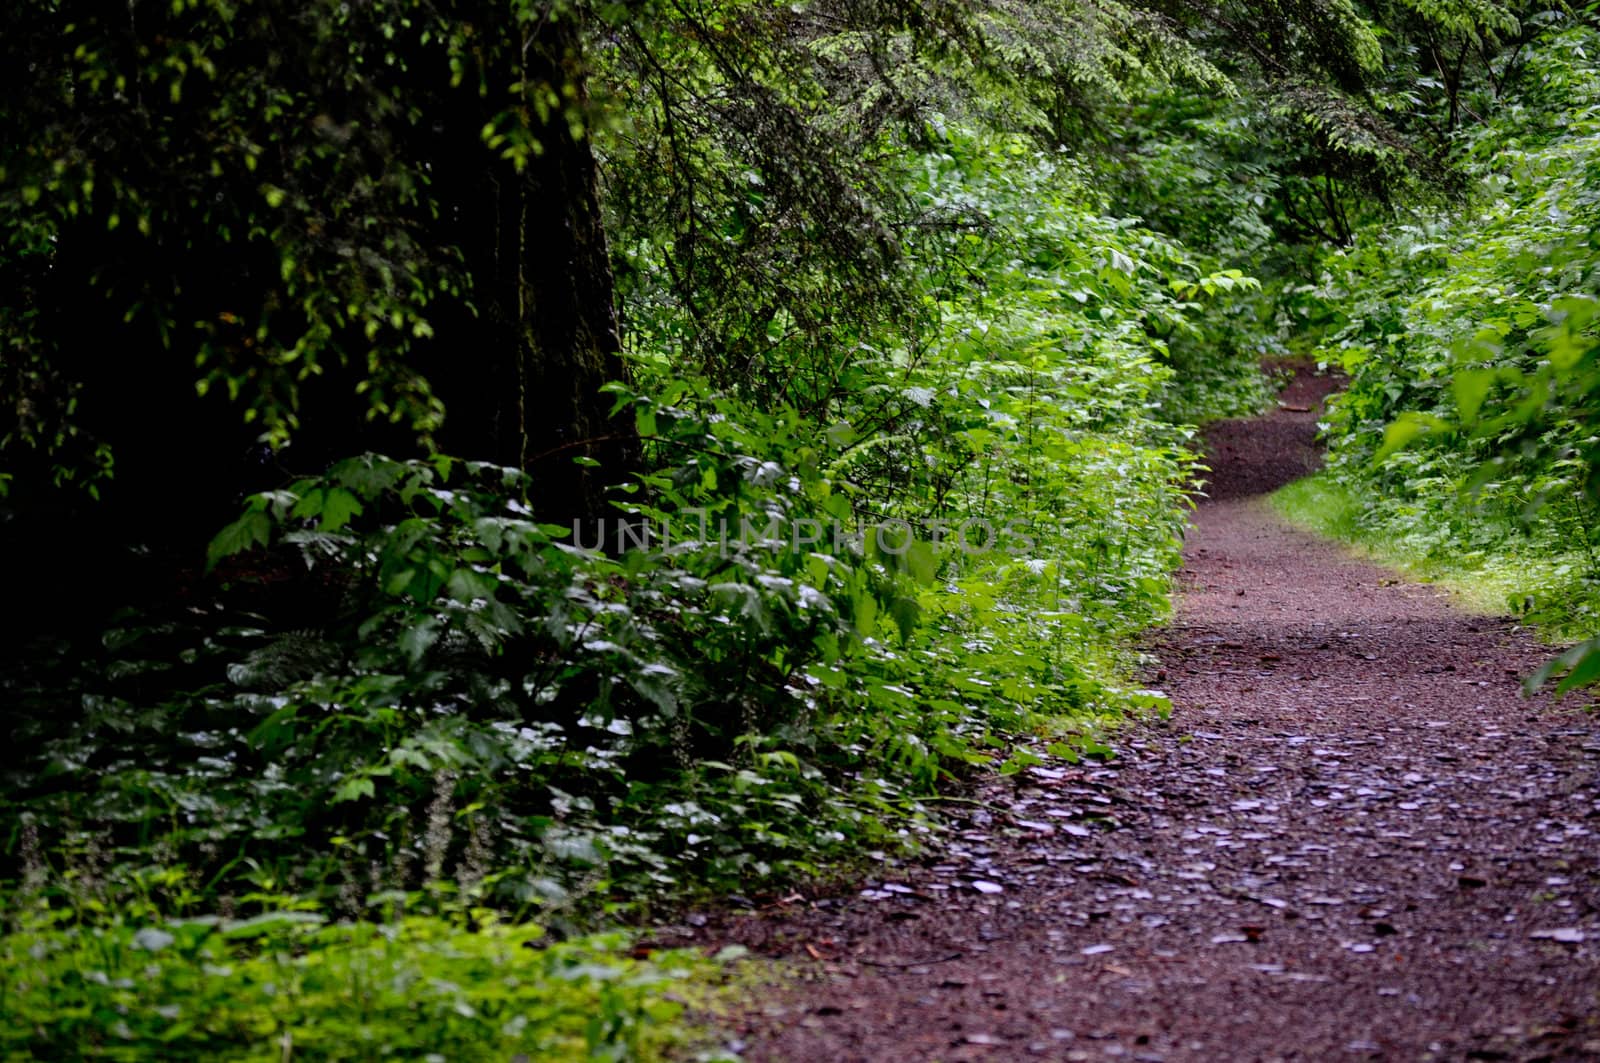 Trail on the right by RefocusPhoto